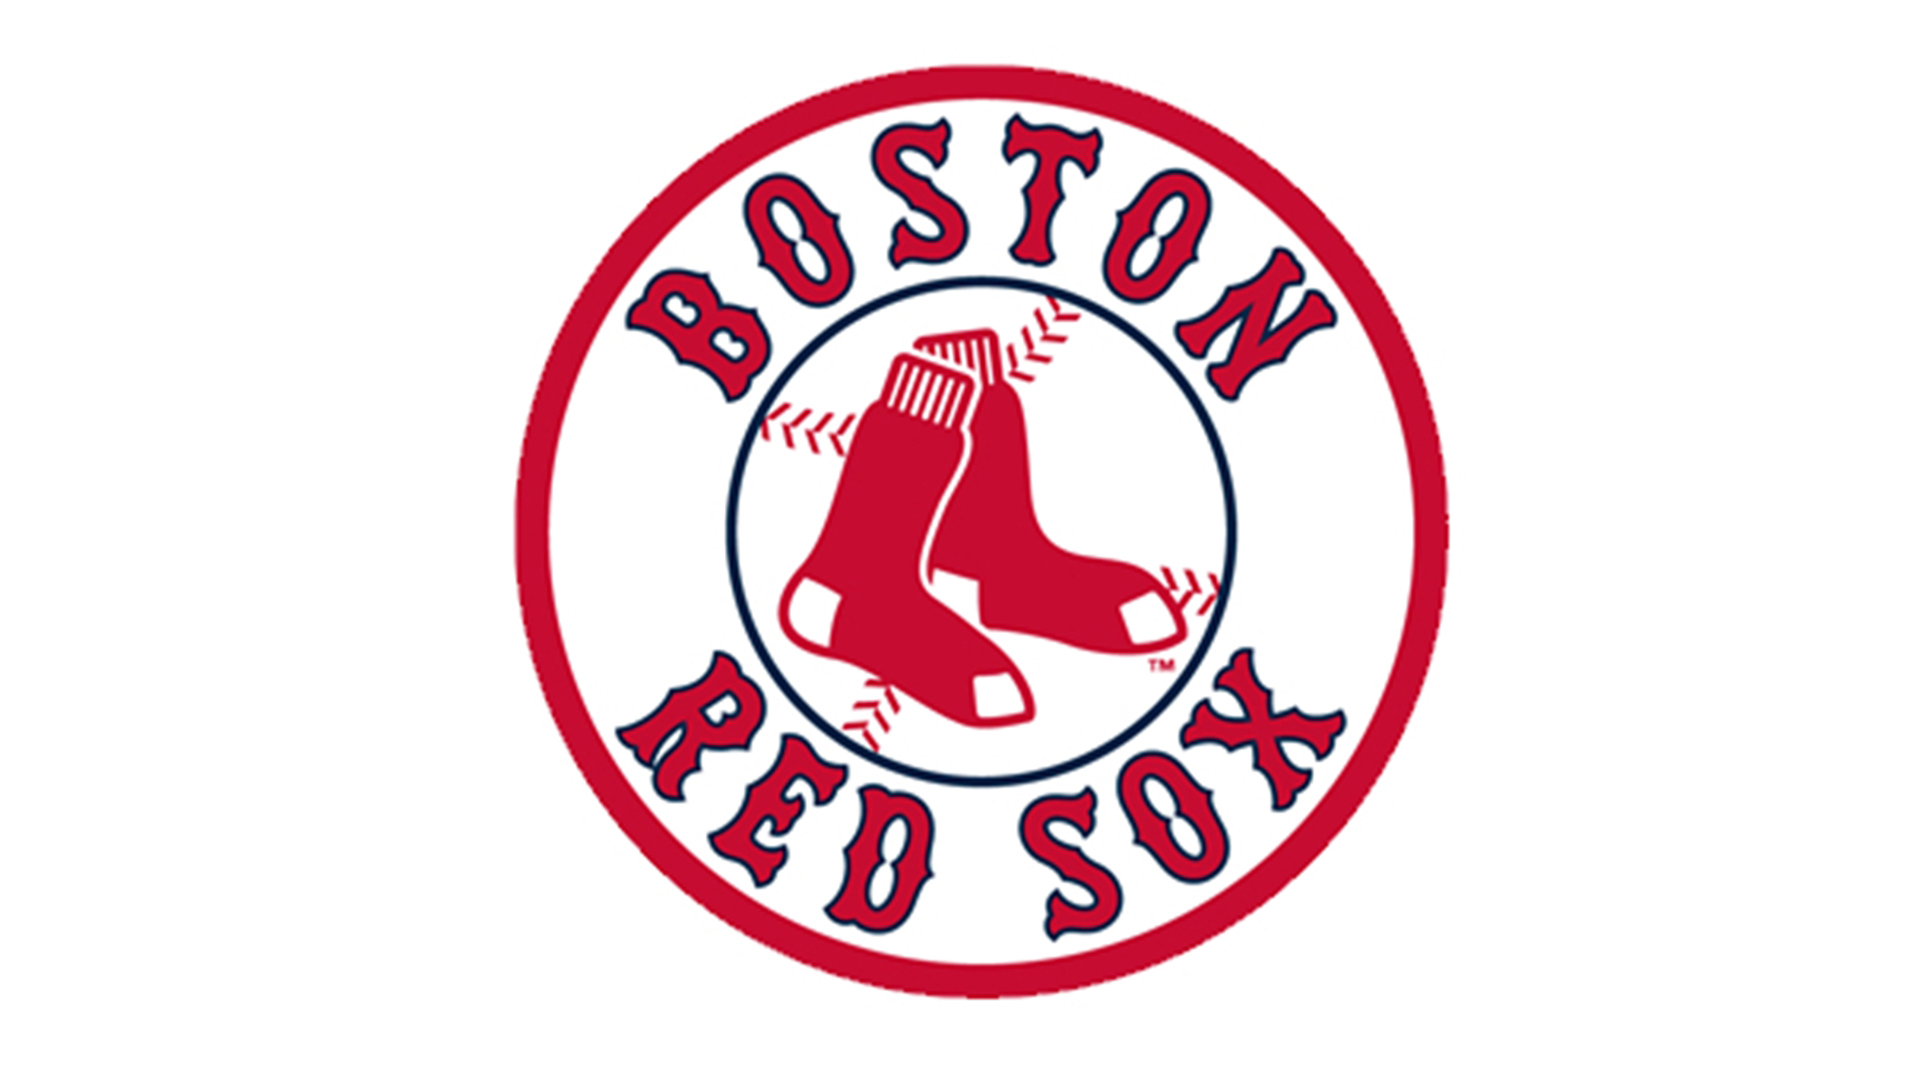 Boston Red Sox Backgrounds Free Download | HD Wallpapers ...